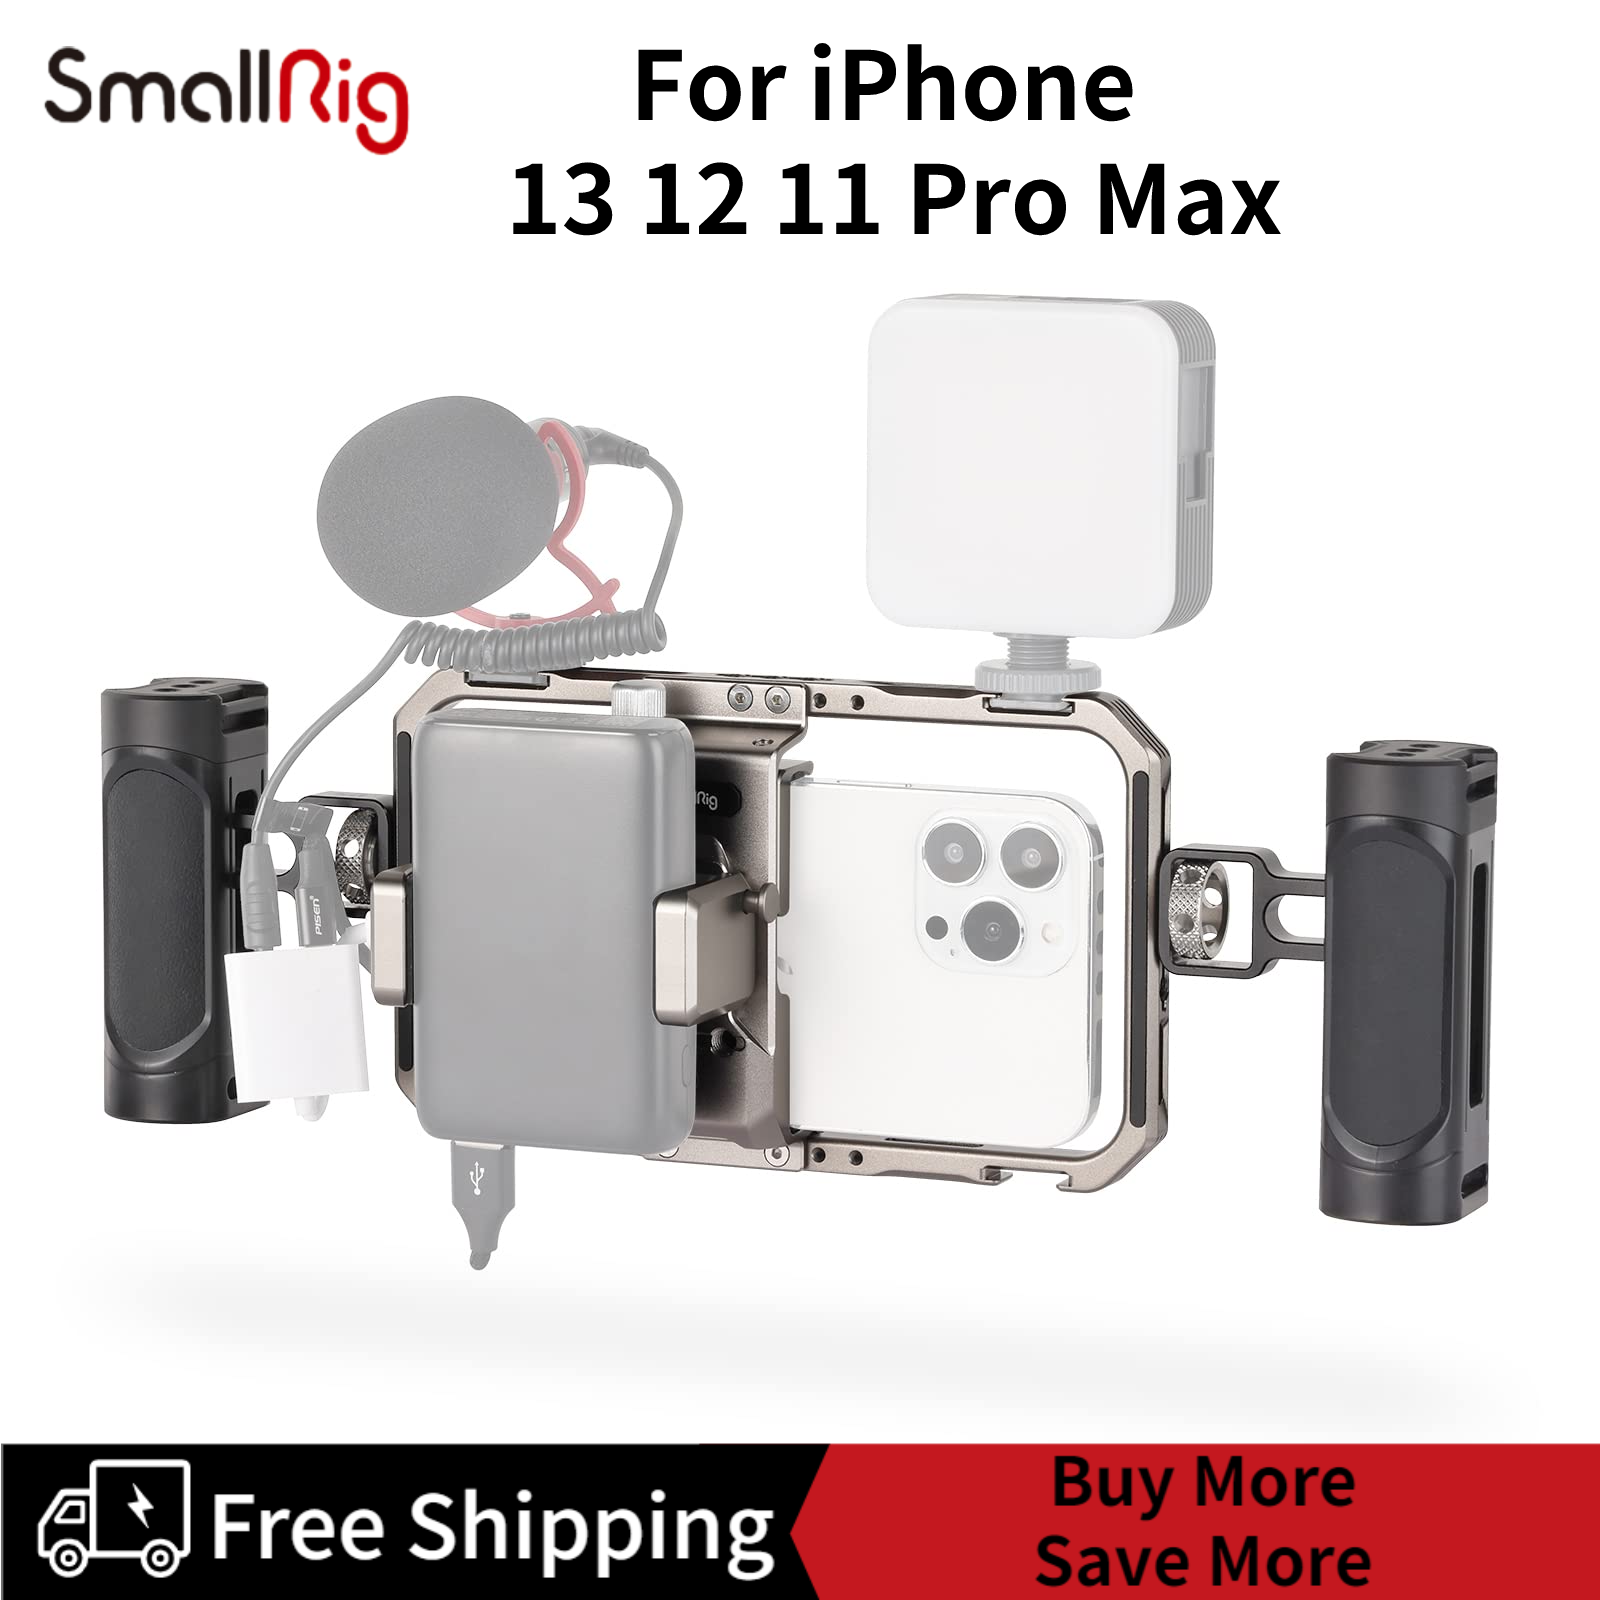  SmallRig Phone Cage Video Rig for iPhone 15 14 13 12 11 Pro Max,  Universal Video Phone Stabilizer with Dual Handles and Power Bank Holder -  3609 : Electronics